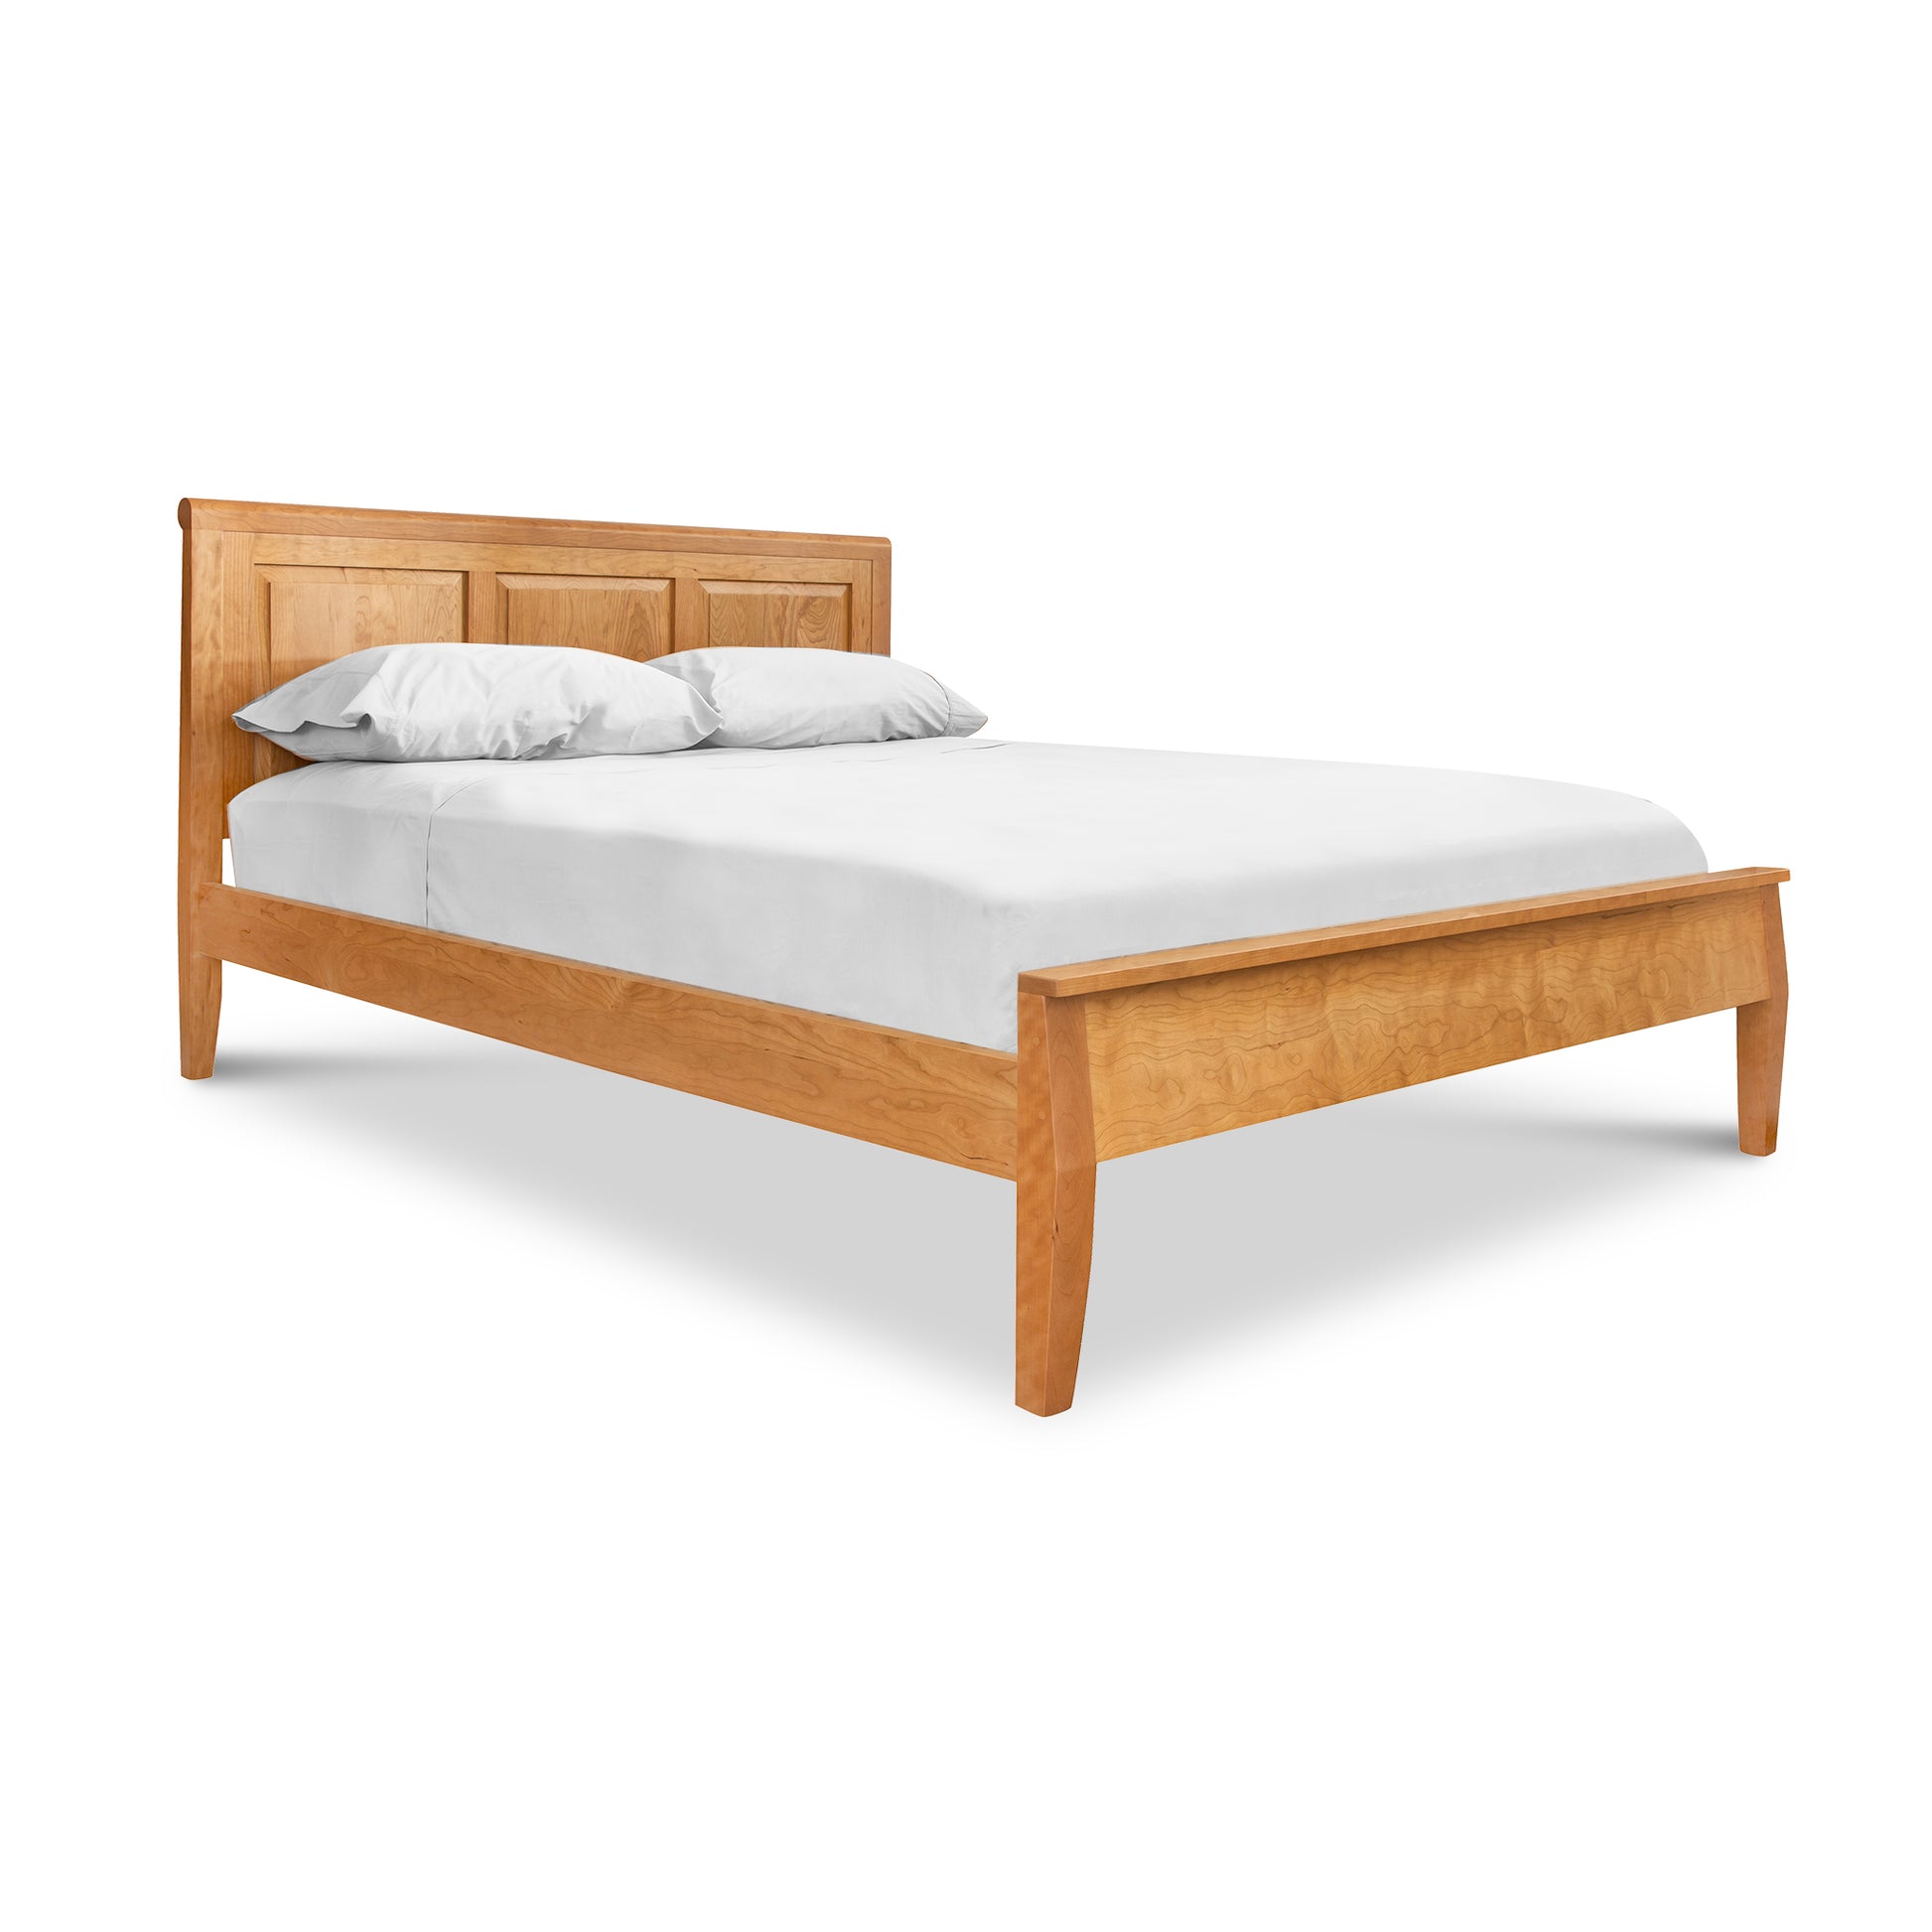 A handcrafted Raised Panel Carriage Low Footboard Bed made from Lyndon Furniture solid hardwood, featuring white sheets.